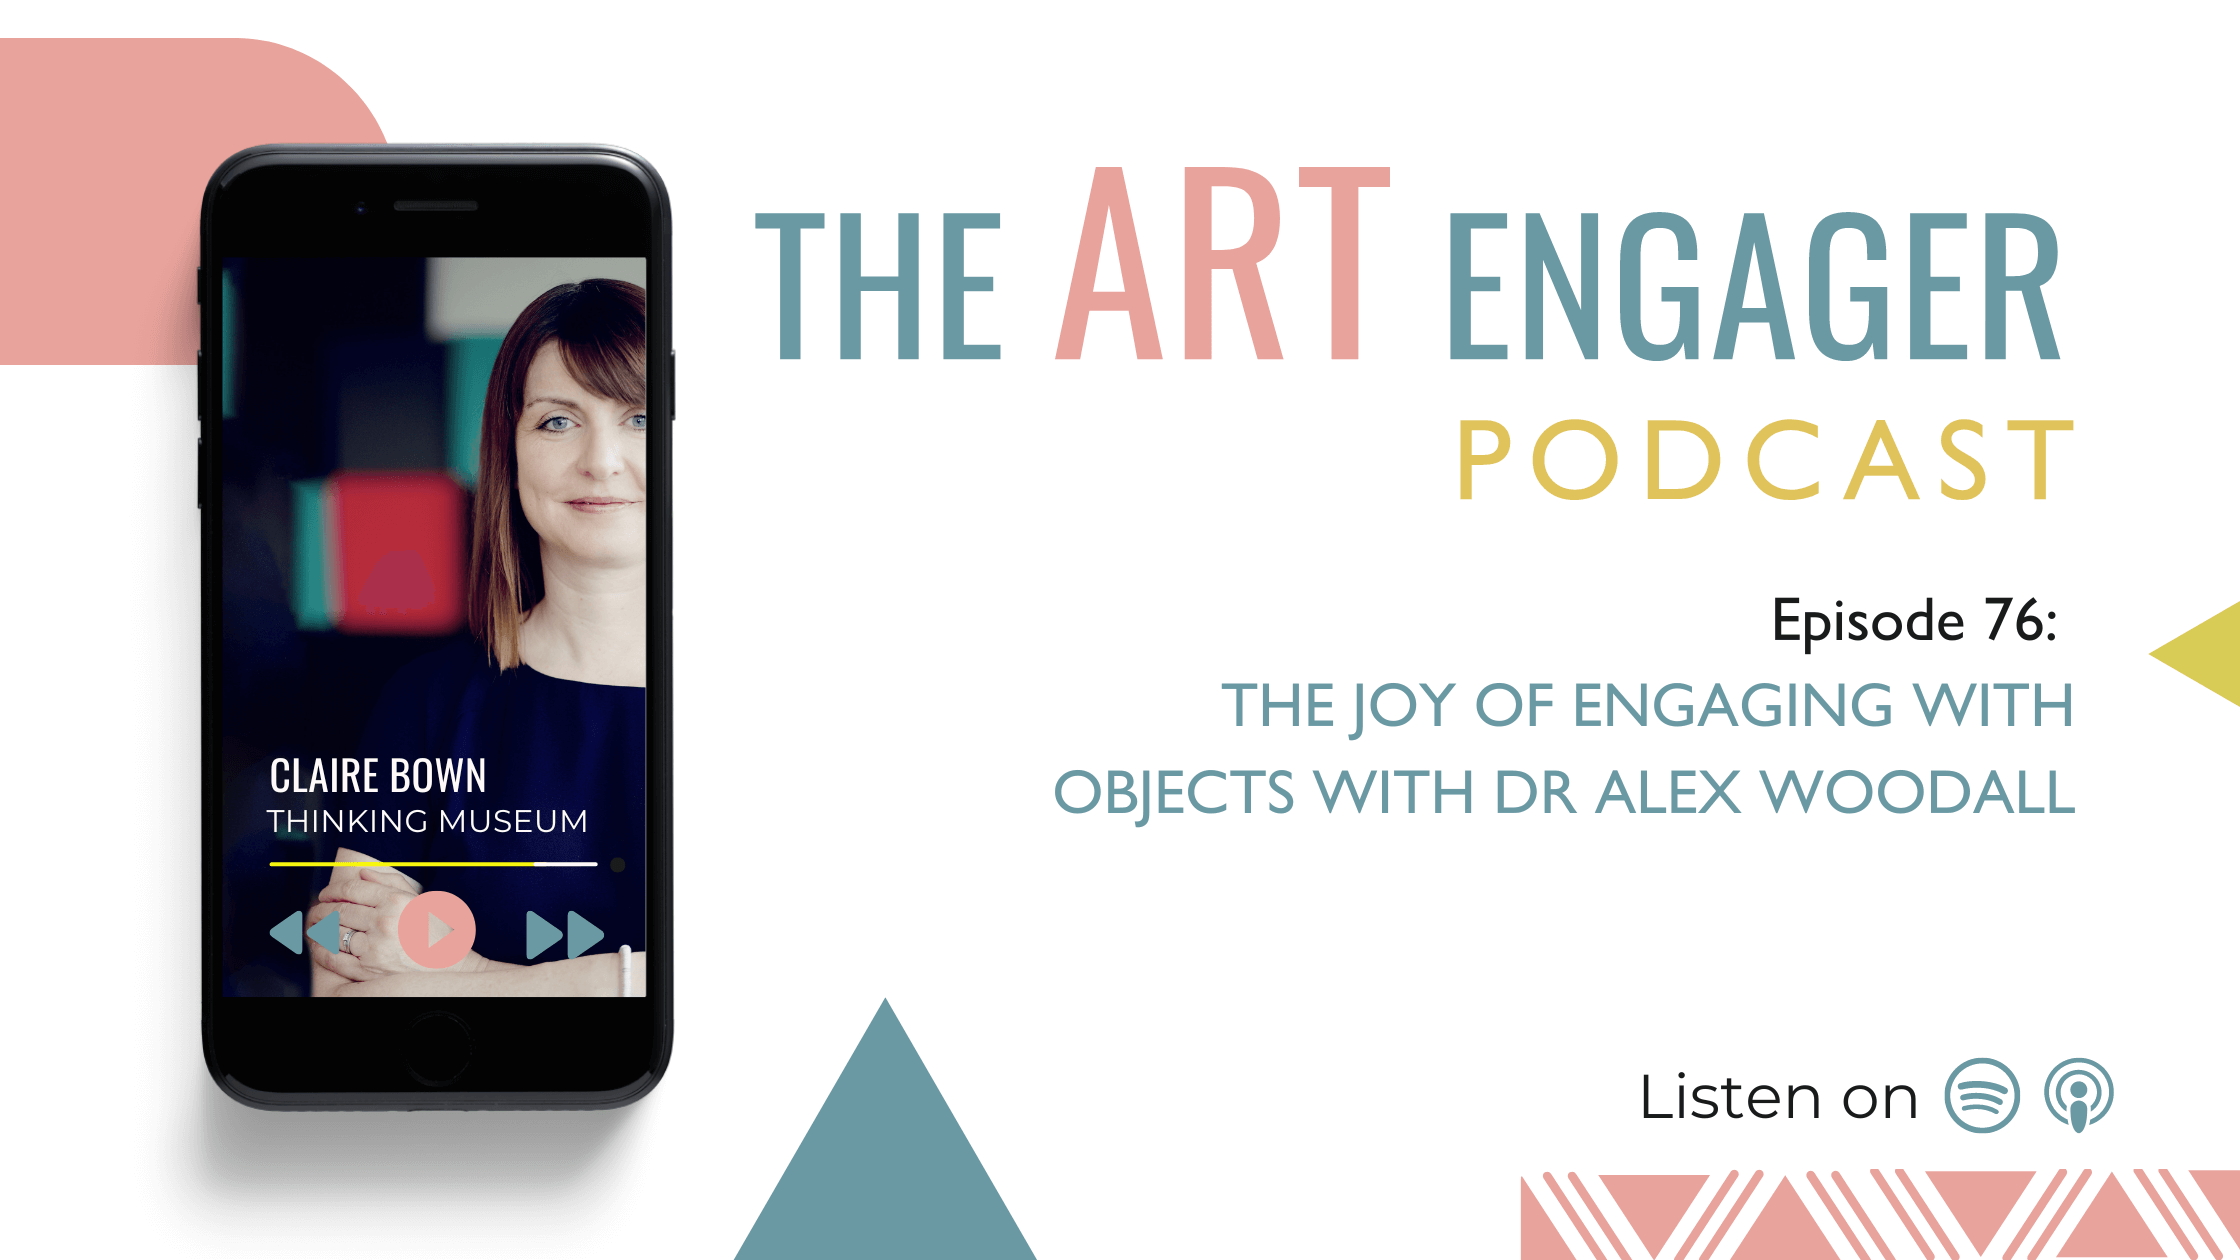 The joy of engaging with objects